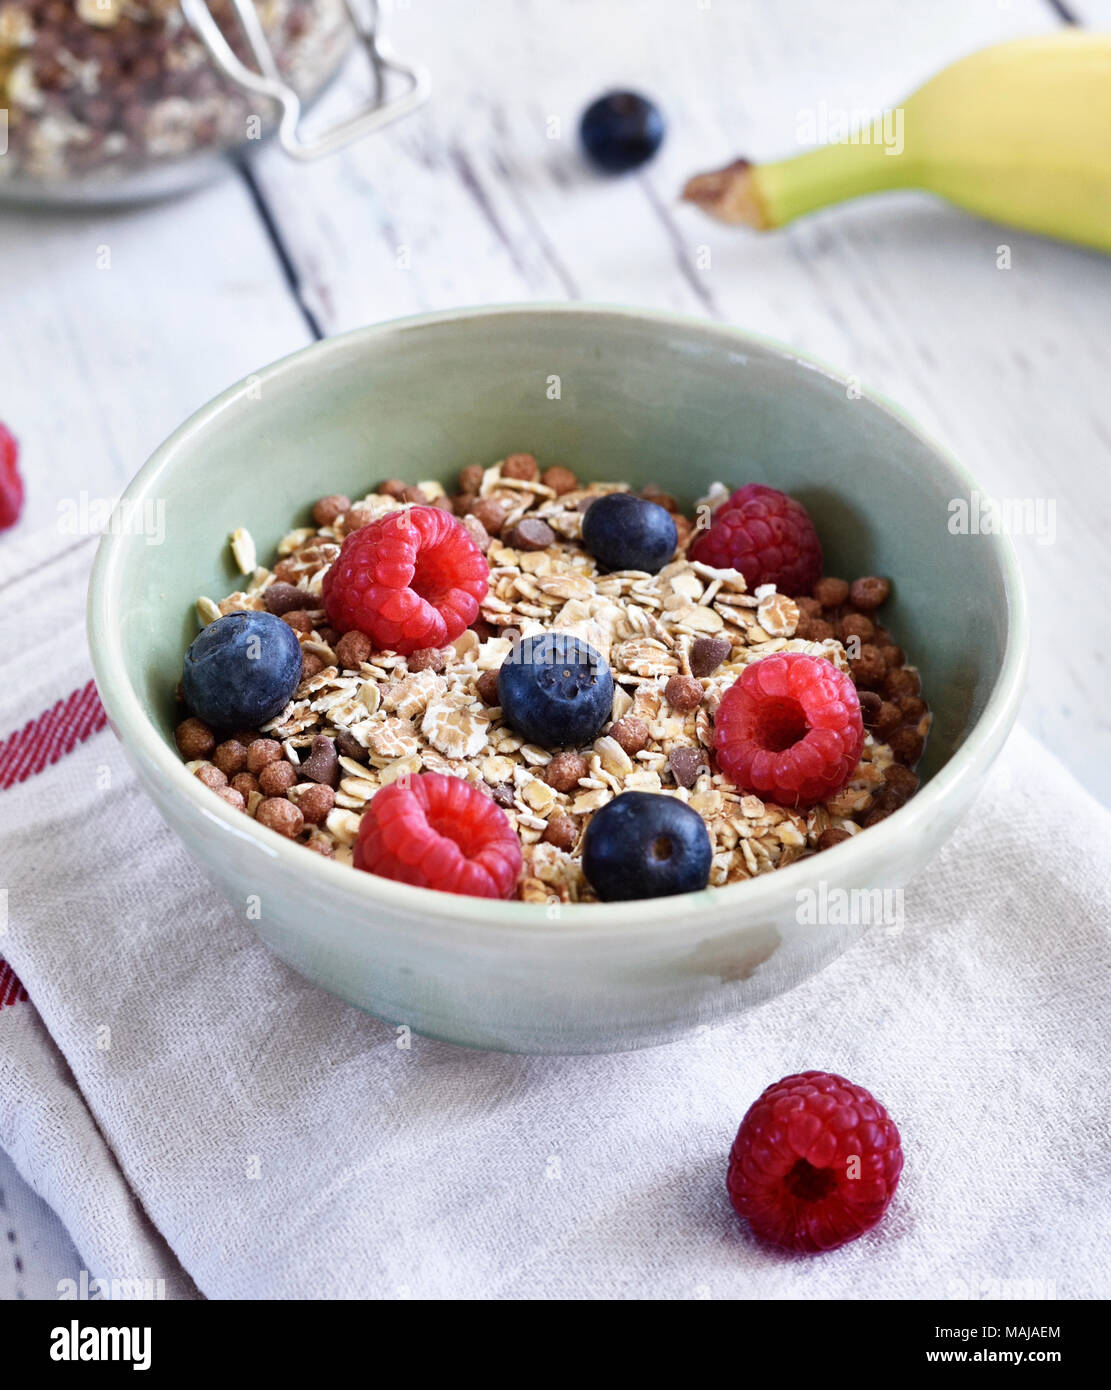 Cereals in a bowl, breakfast scene with fresh fruits and muesli, healthy eating. Breakfast bowl on a wooden table, rustic scene. Stock Photo